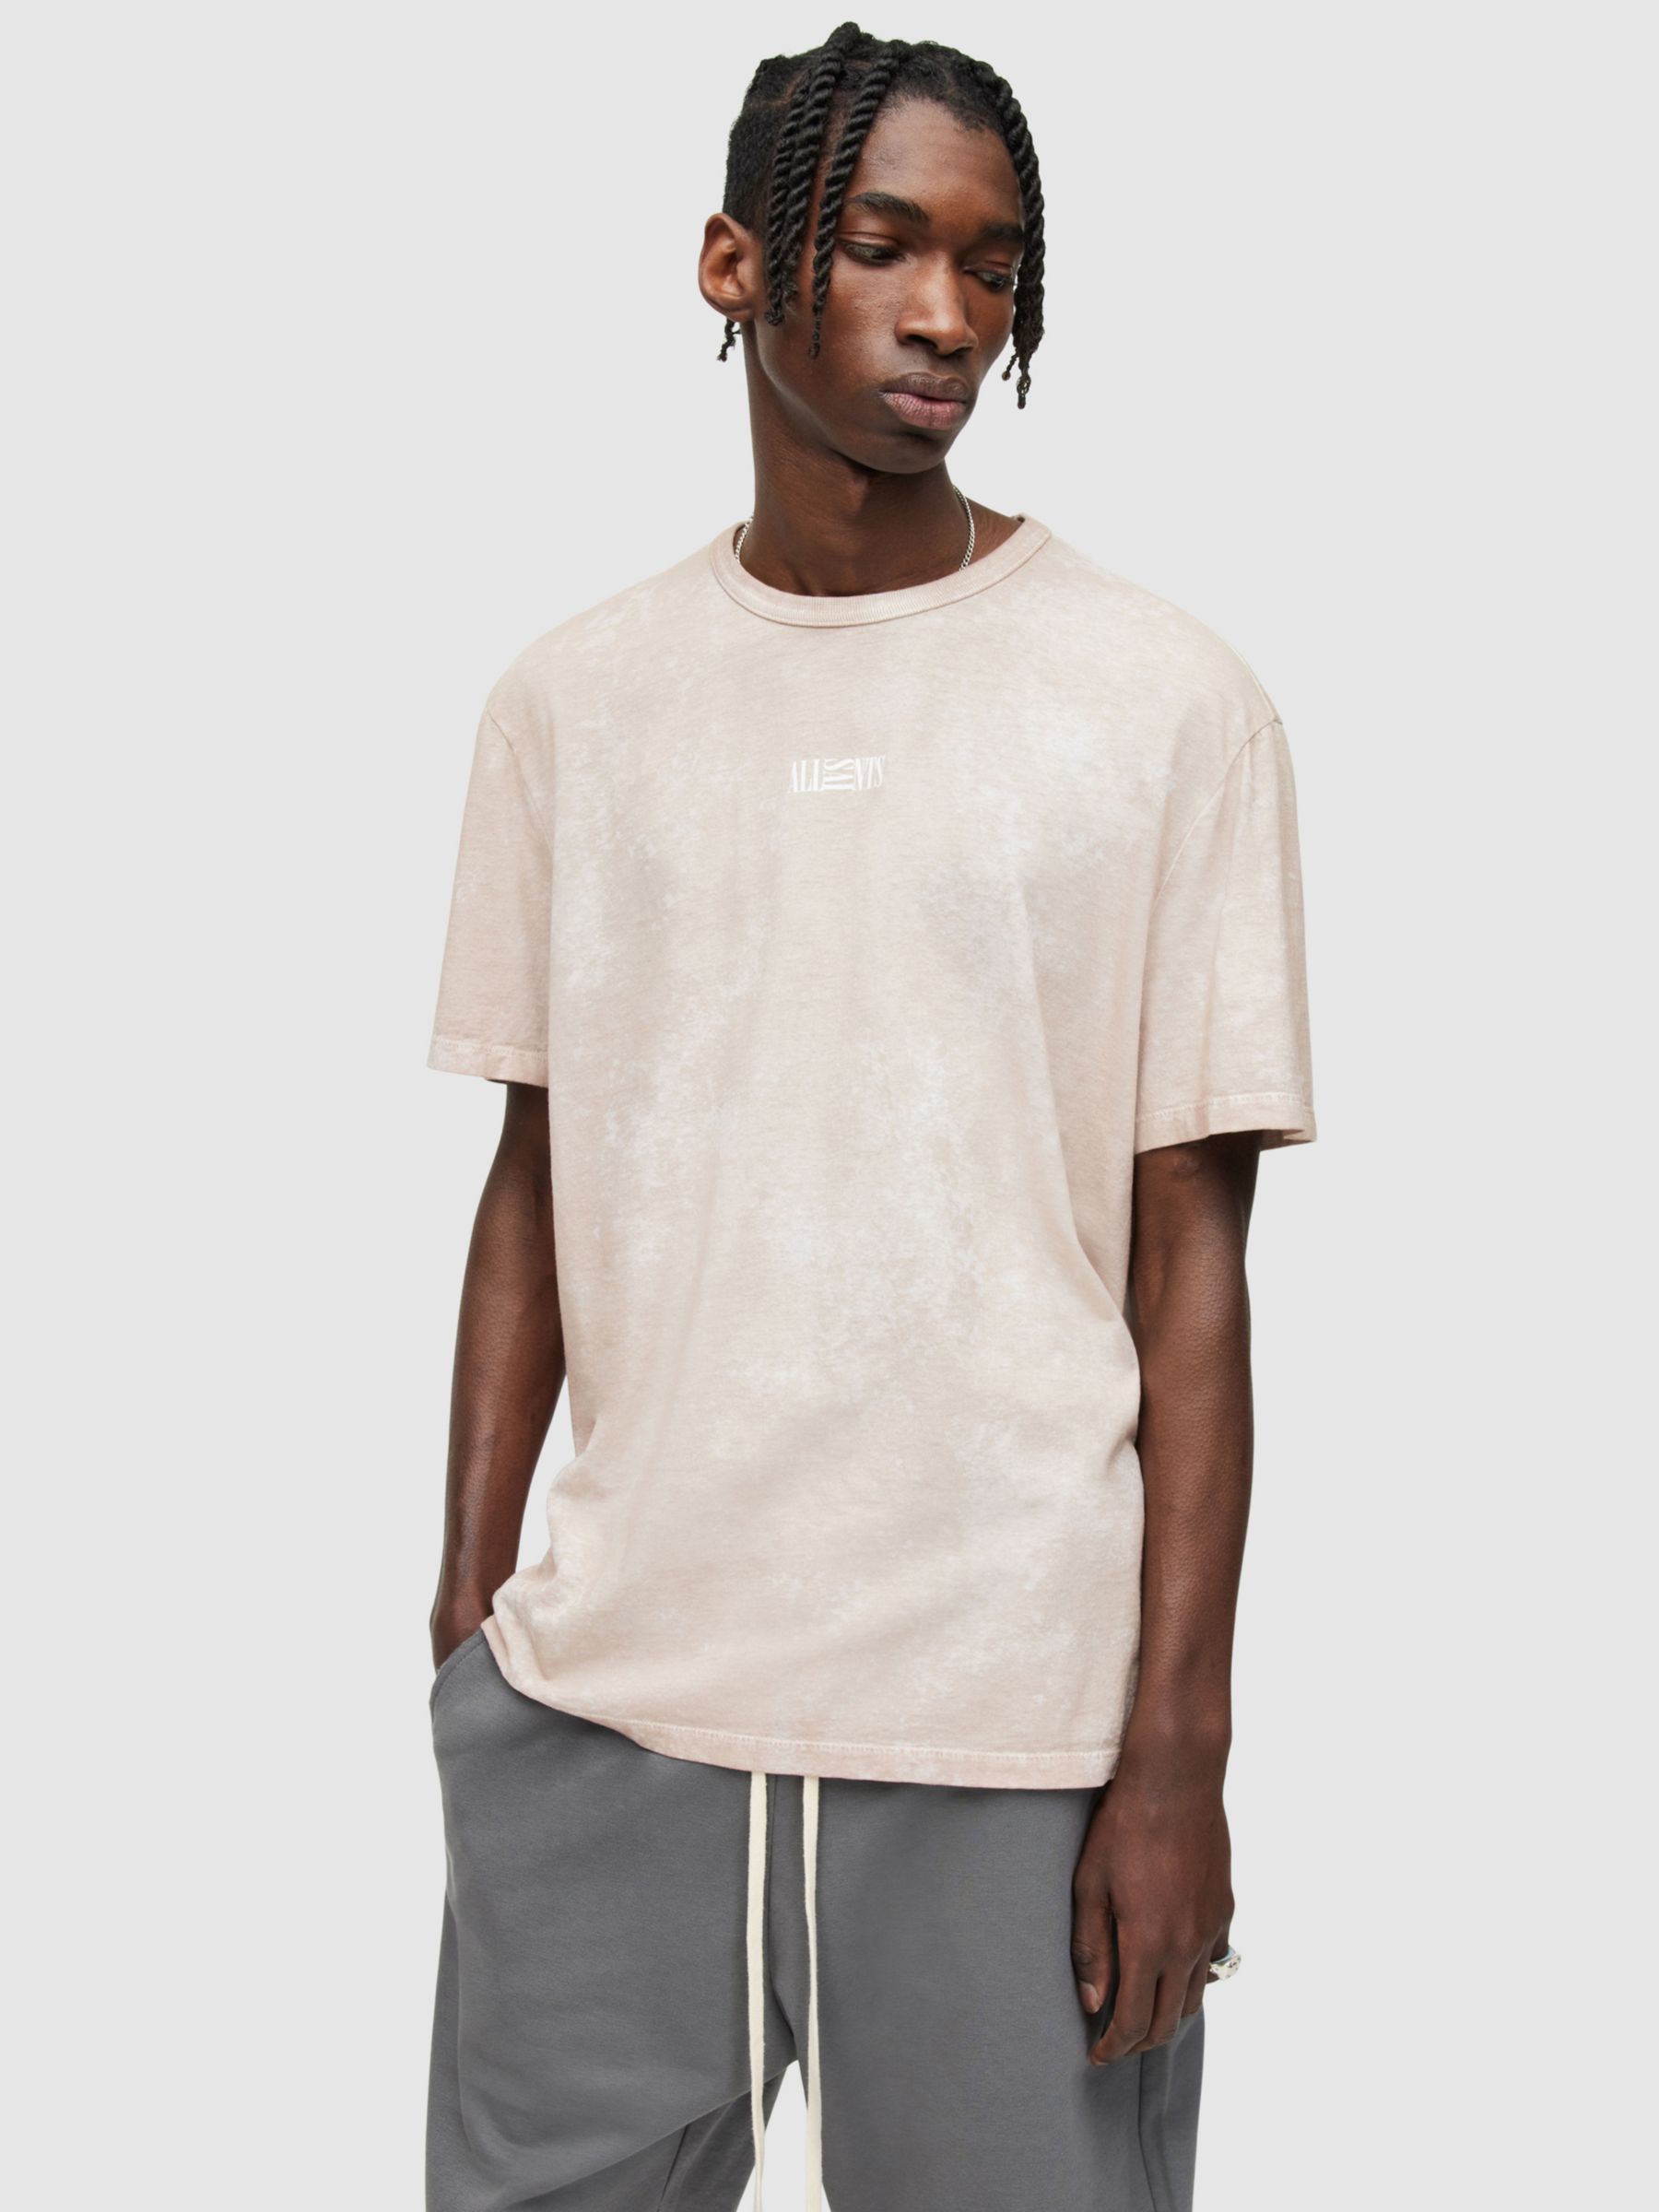 AllSaints Opposition Short Sleeve Crew Neck T-Shirt, Peached Taupe